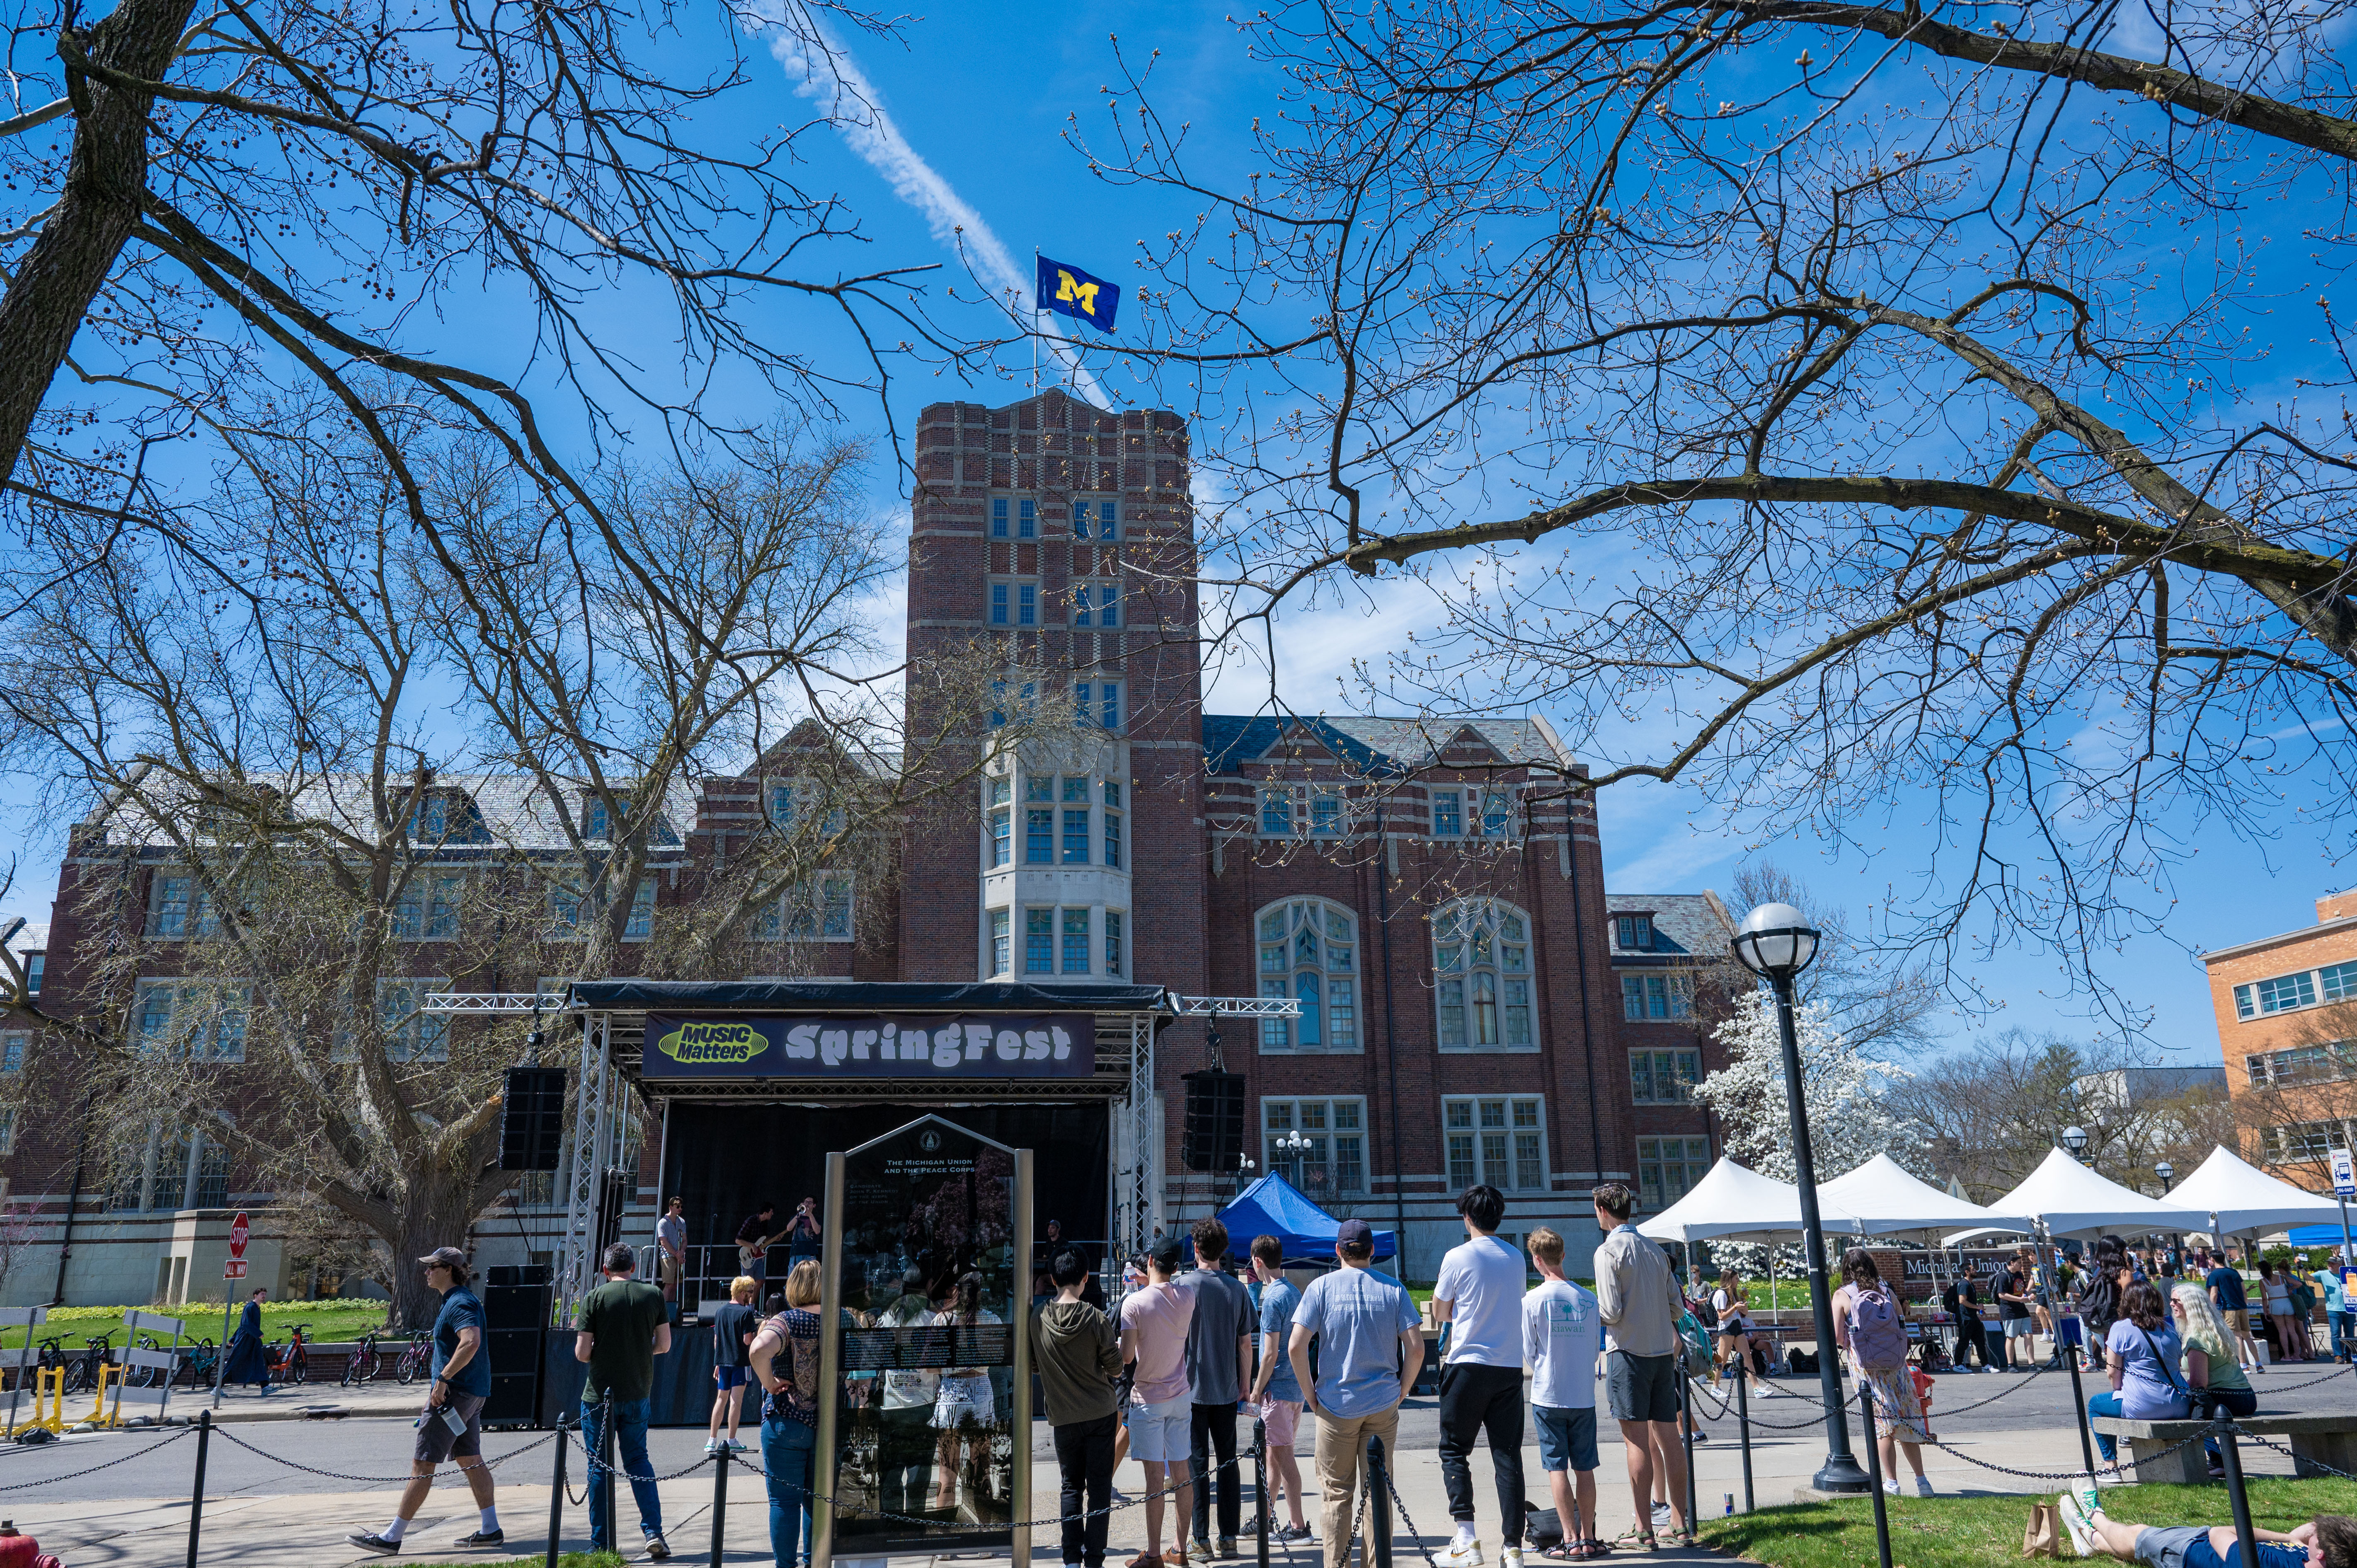 springfest event happening outside of Michigan Union building